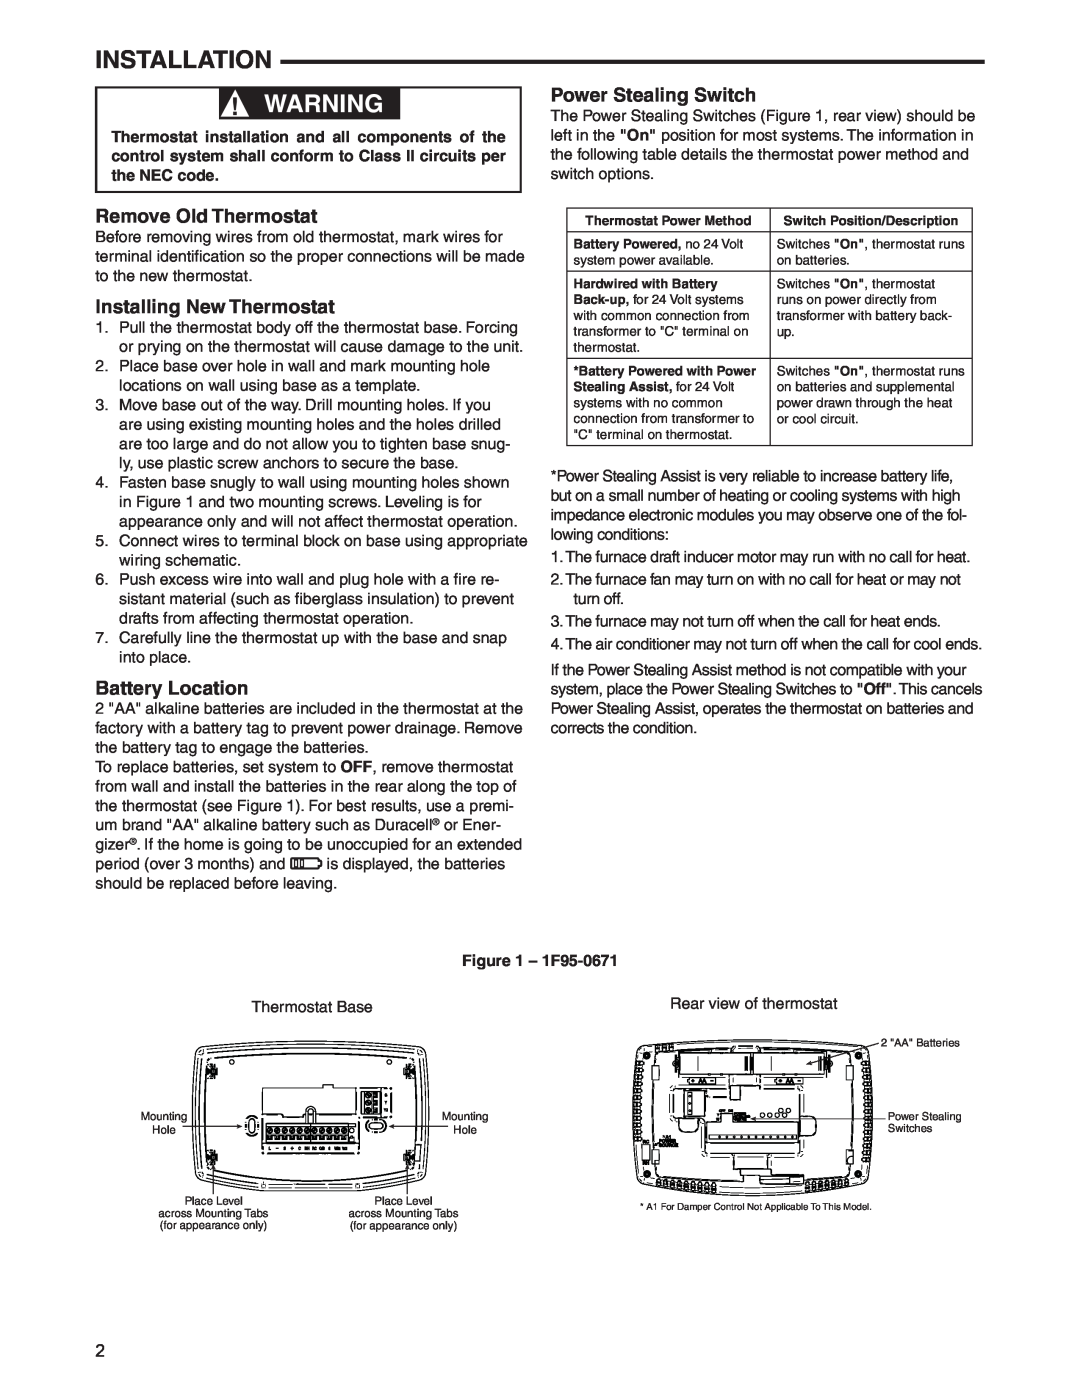 White Rodgers 1F95-0671 specifications Installation, Remove Old Thermostat, Installing New Thermostat, Battery Location 